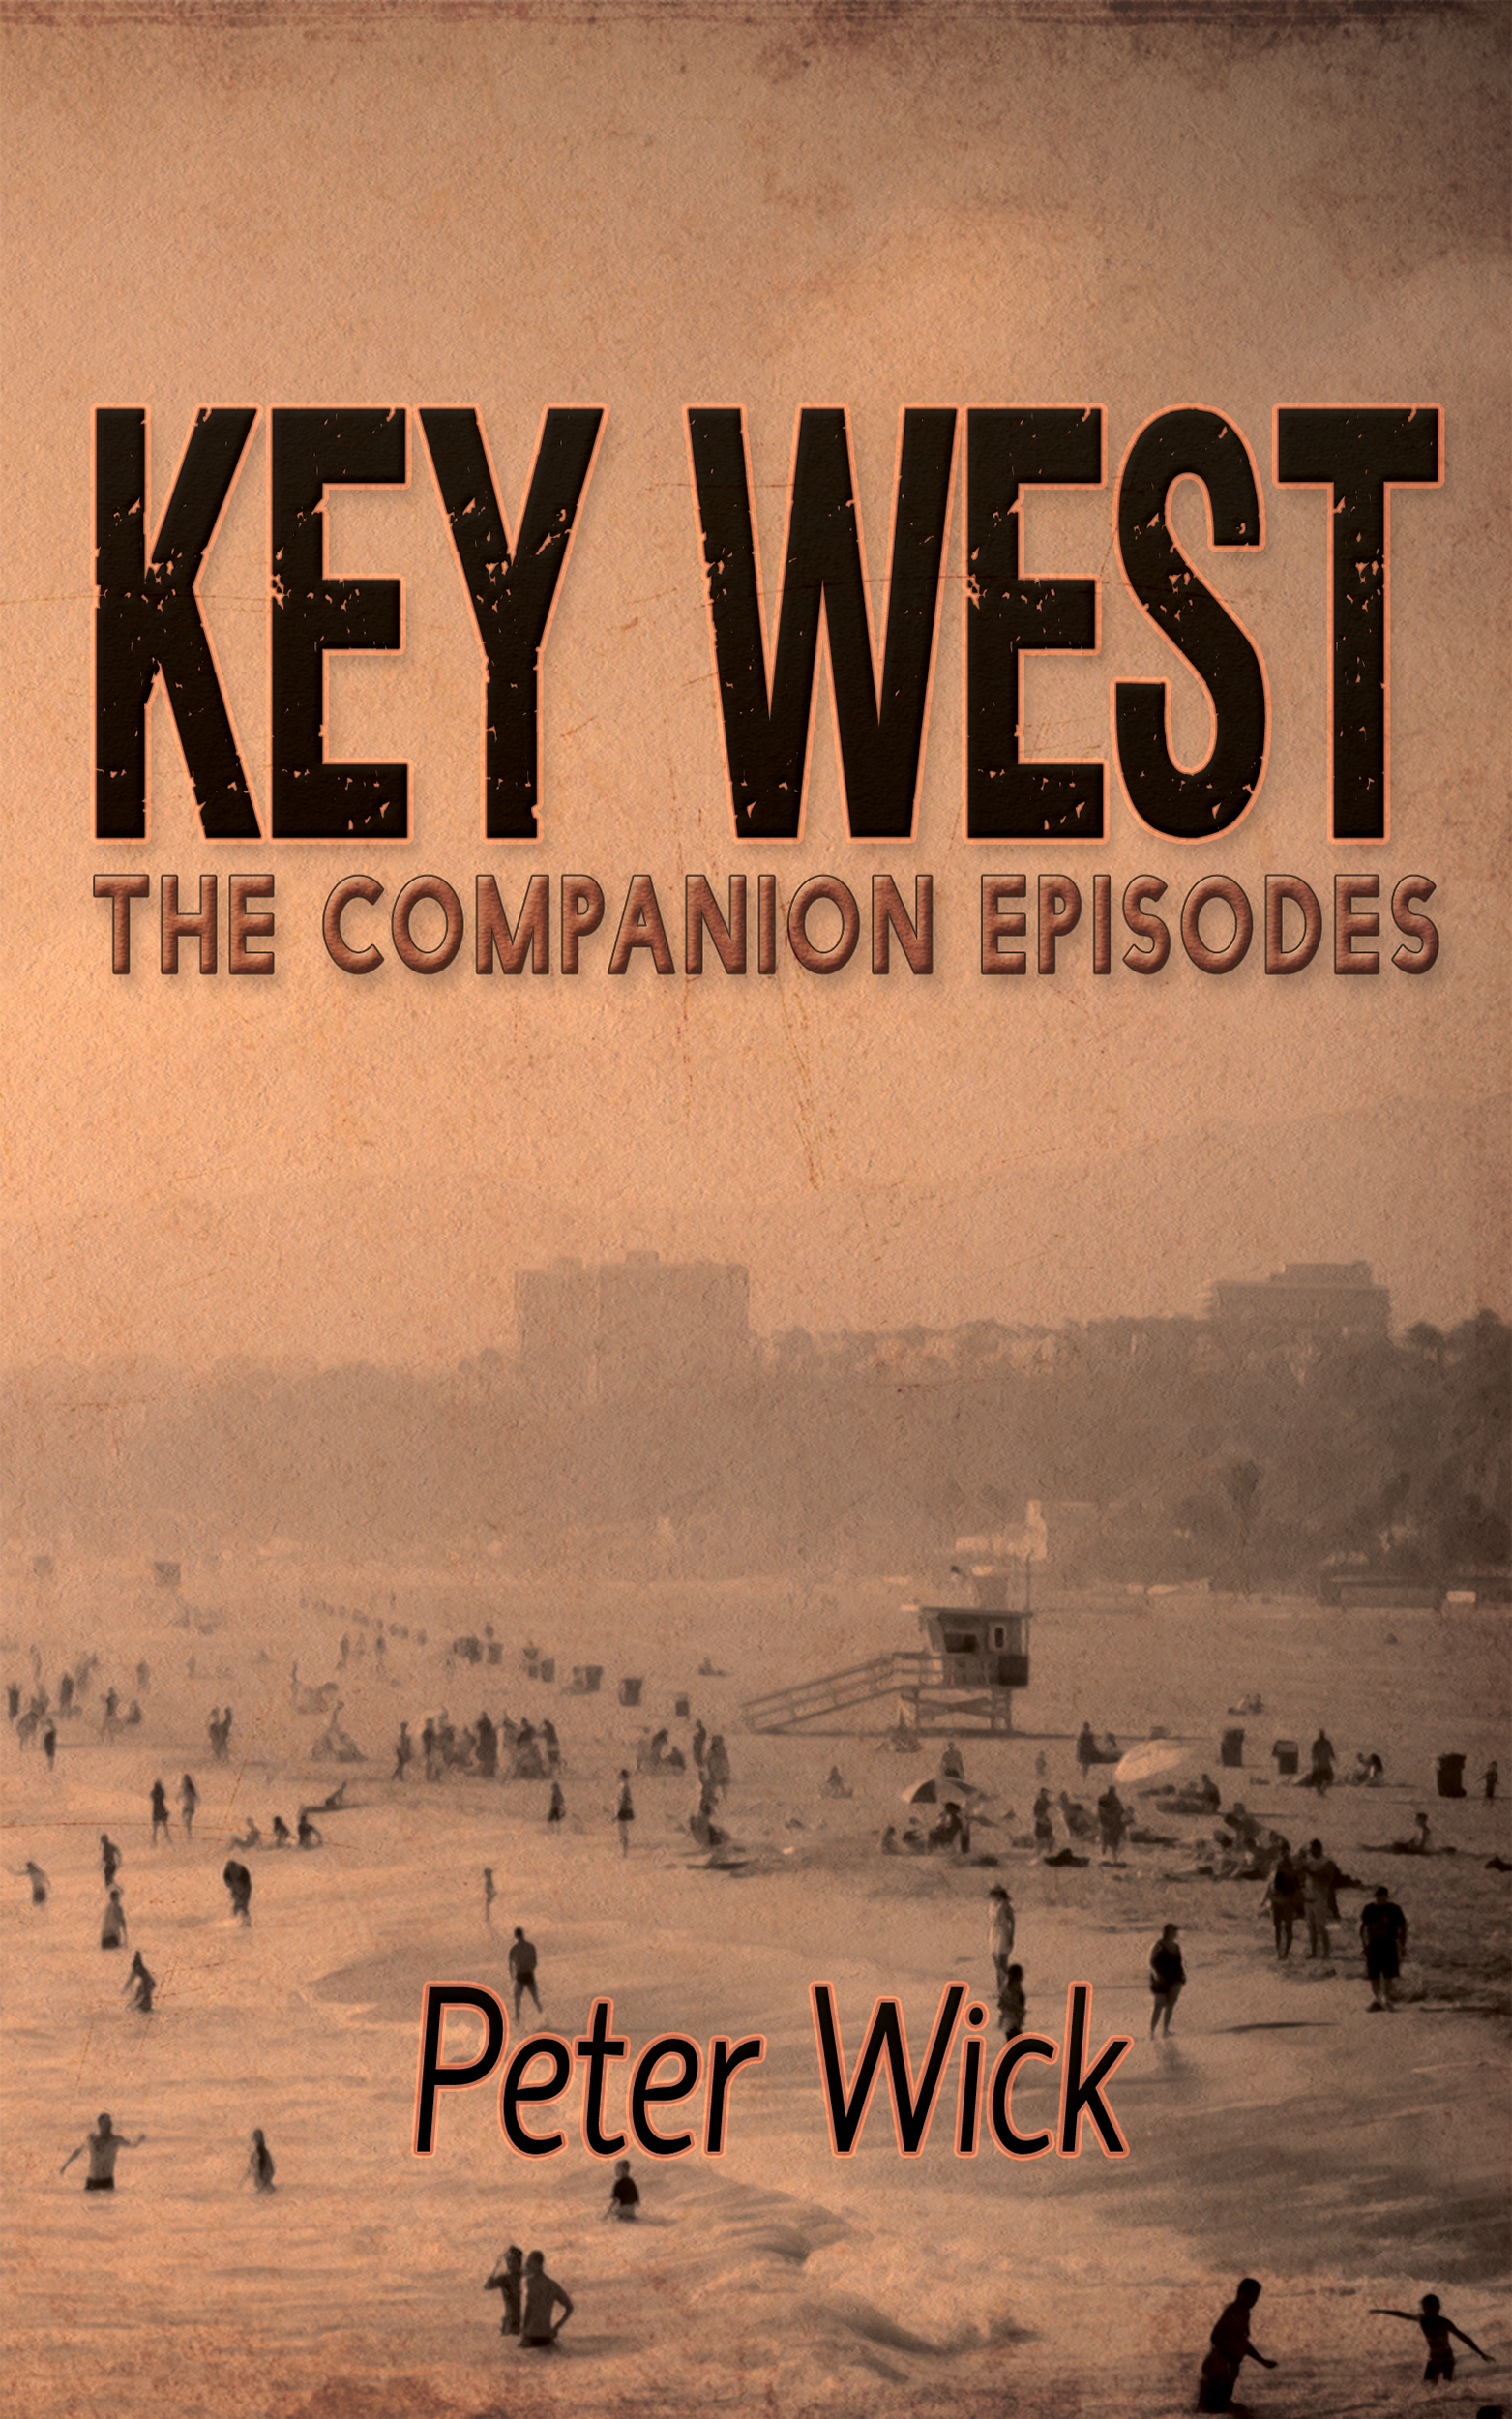 KeyWest-TheCompanionEpisodes-AmazonKindleCover-FRONT